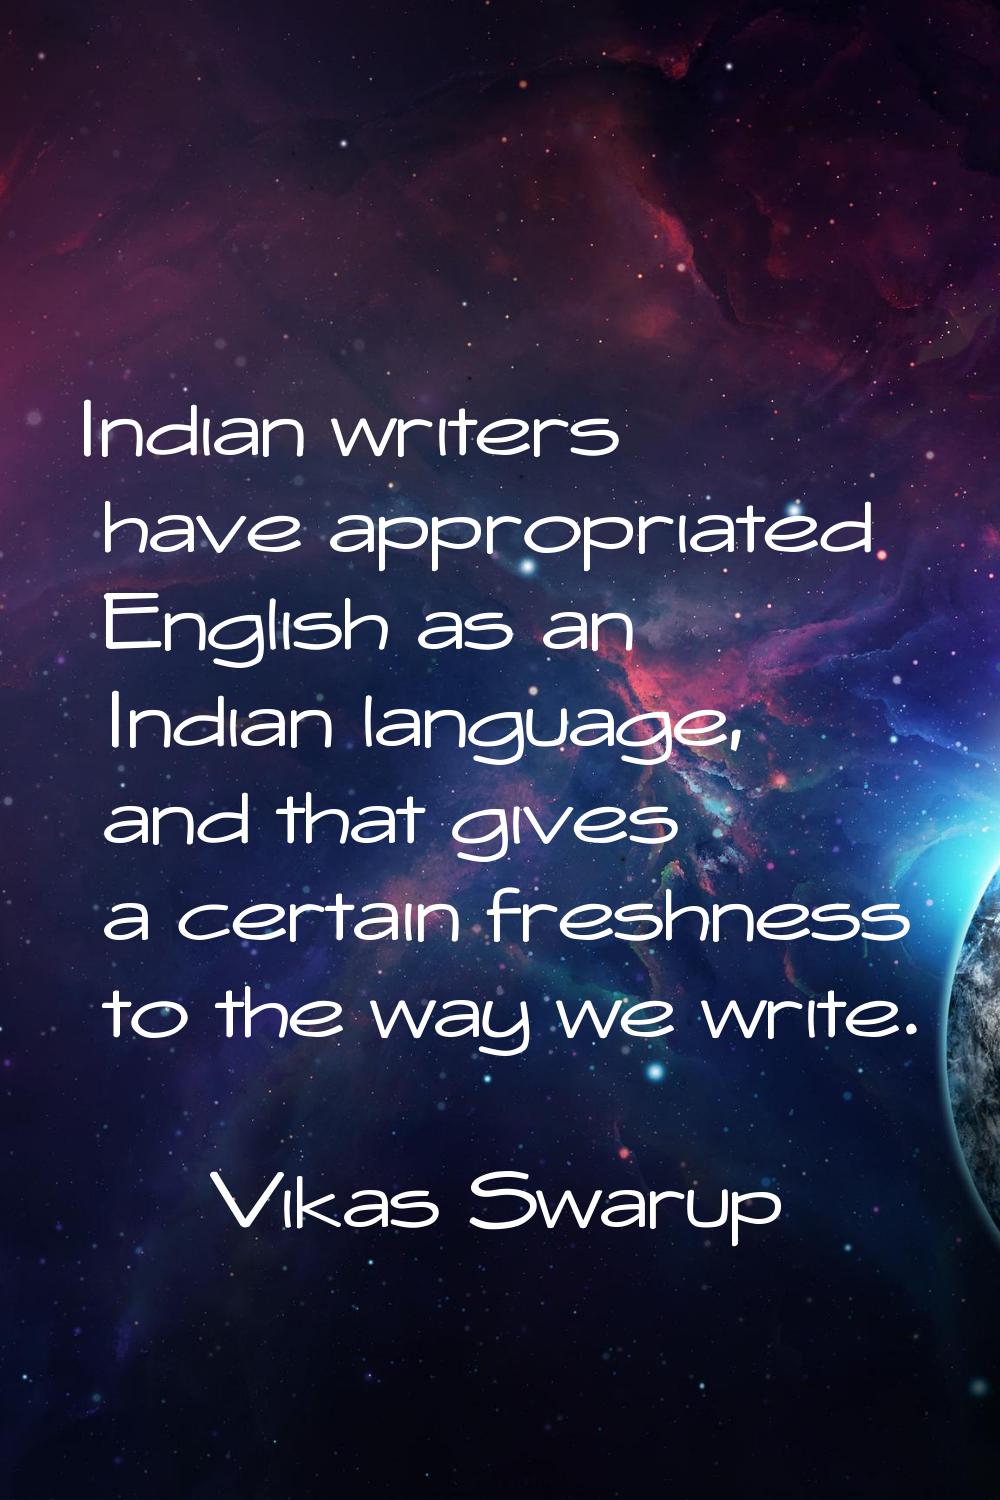 Indian writers have appropriated English as an Indian language, and that gives a certain freshness 